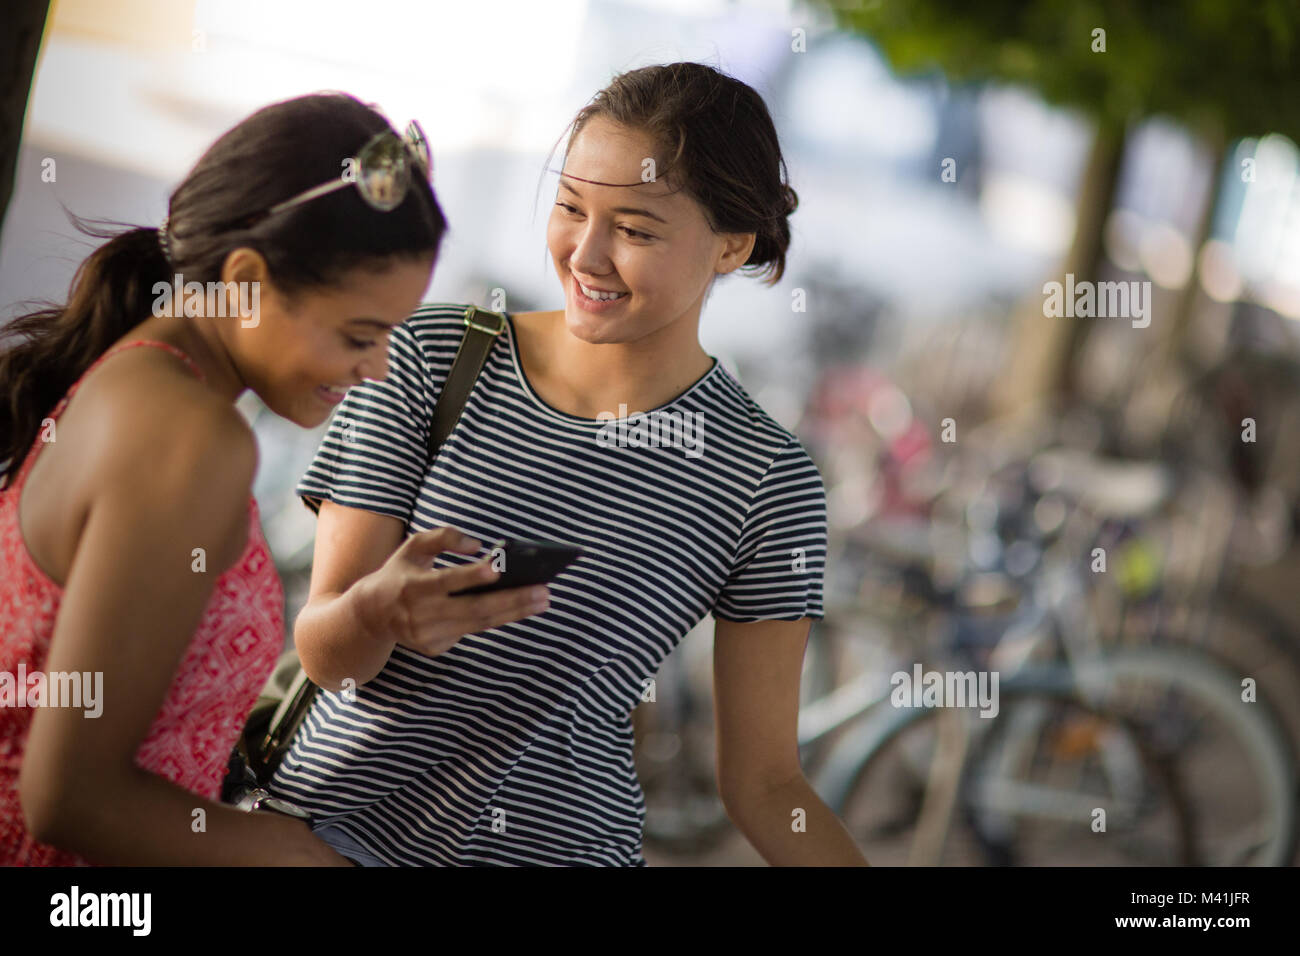 Students on way to college looking at smartphone Stock Photo